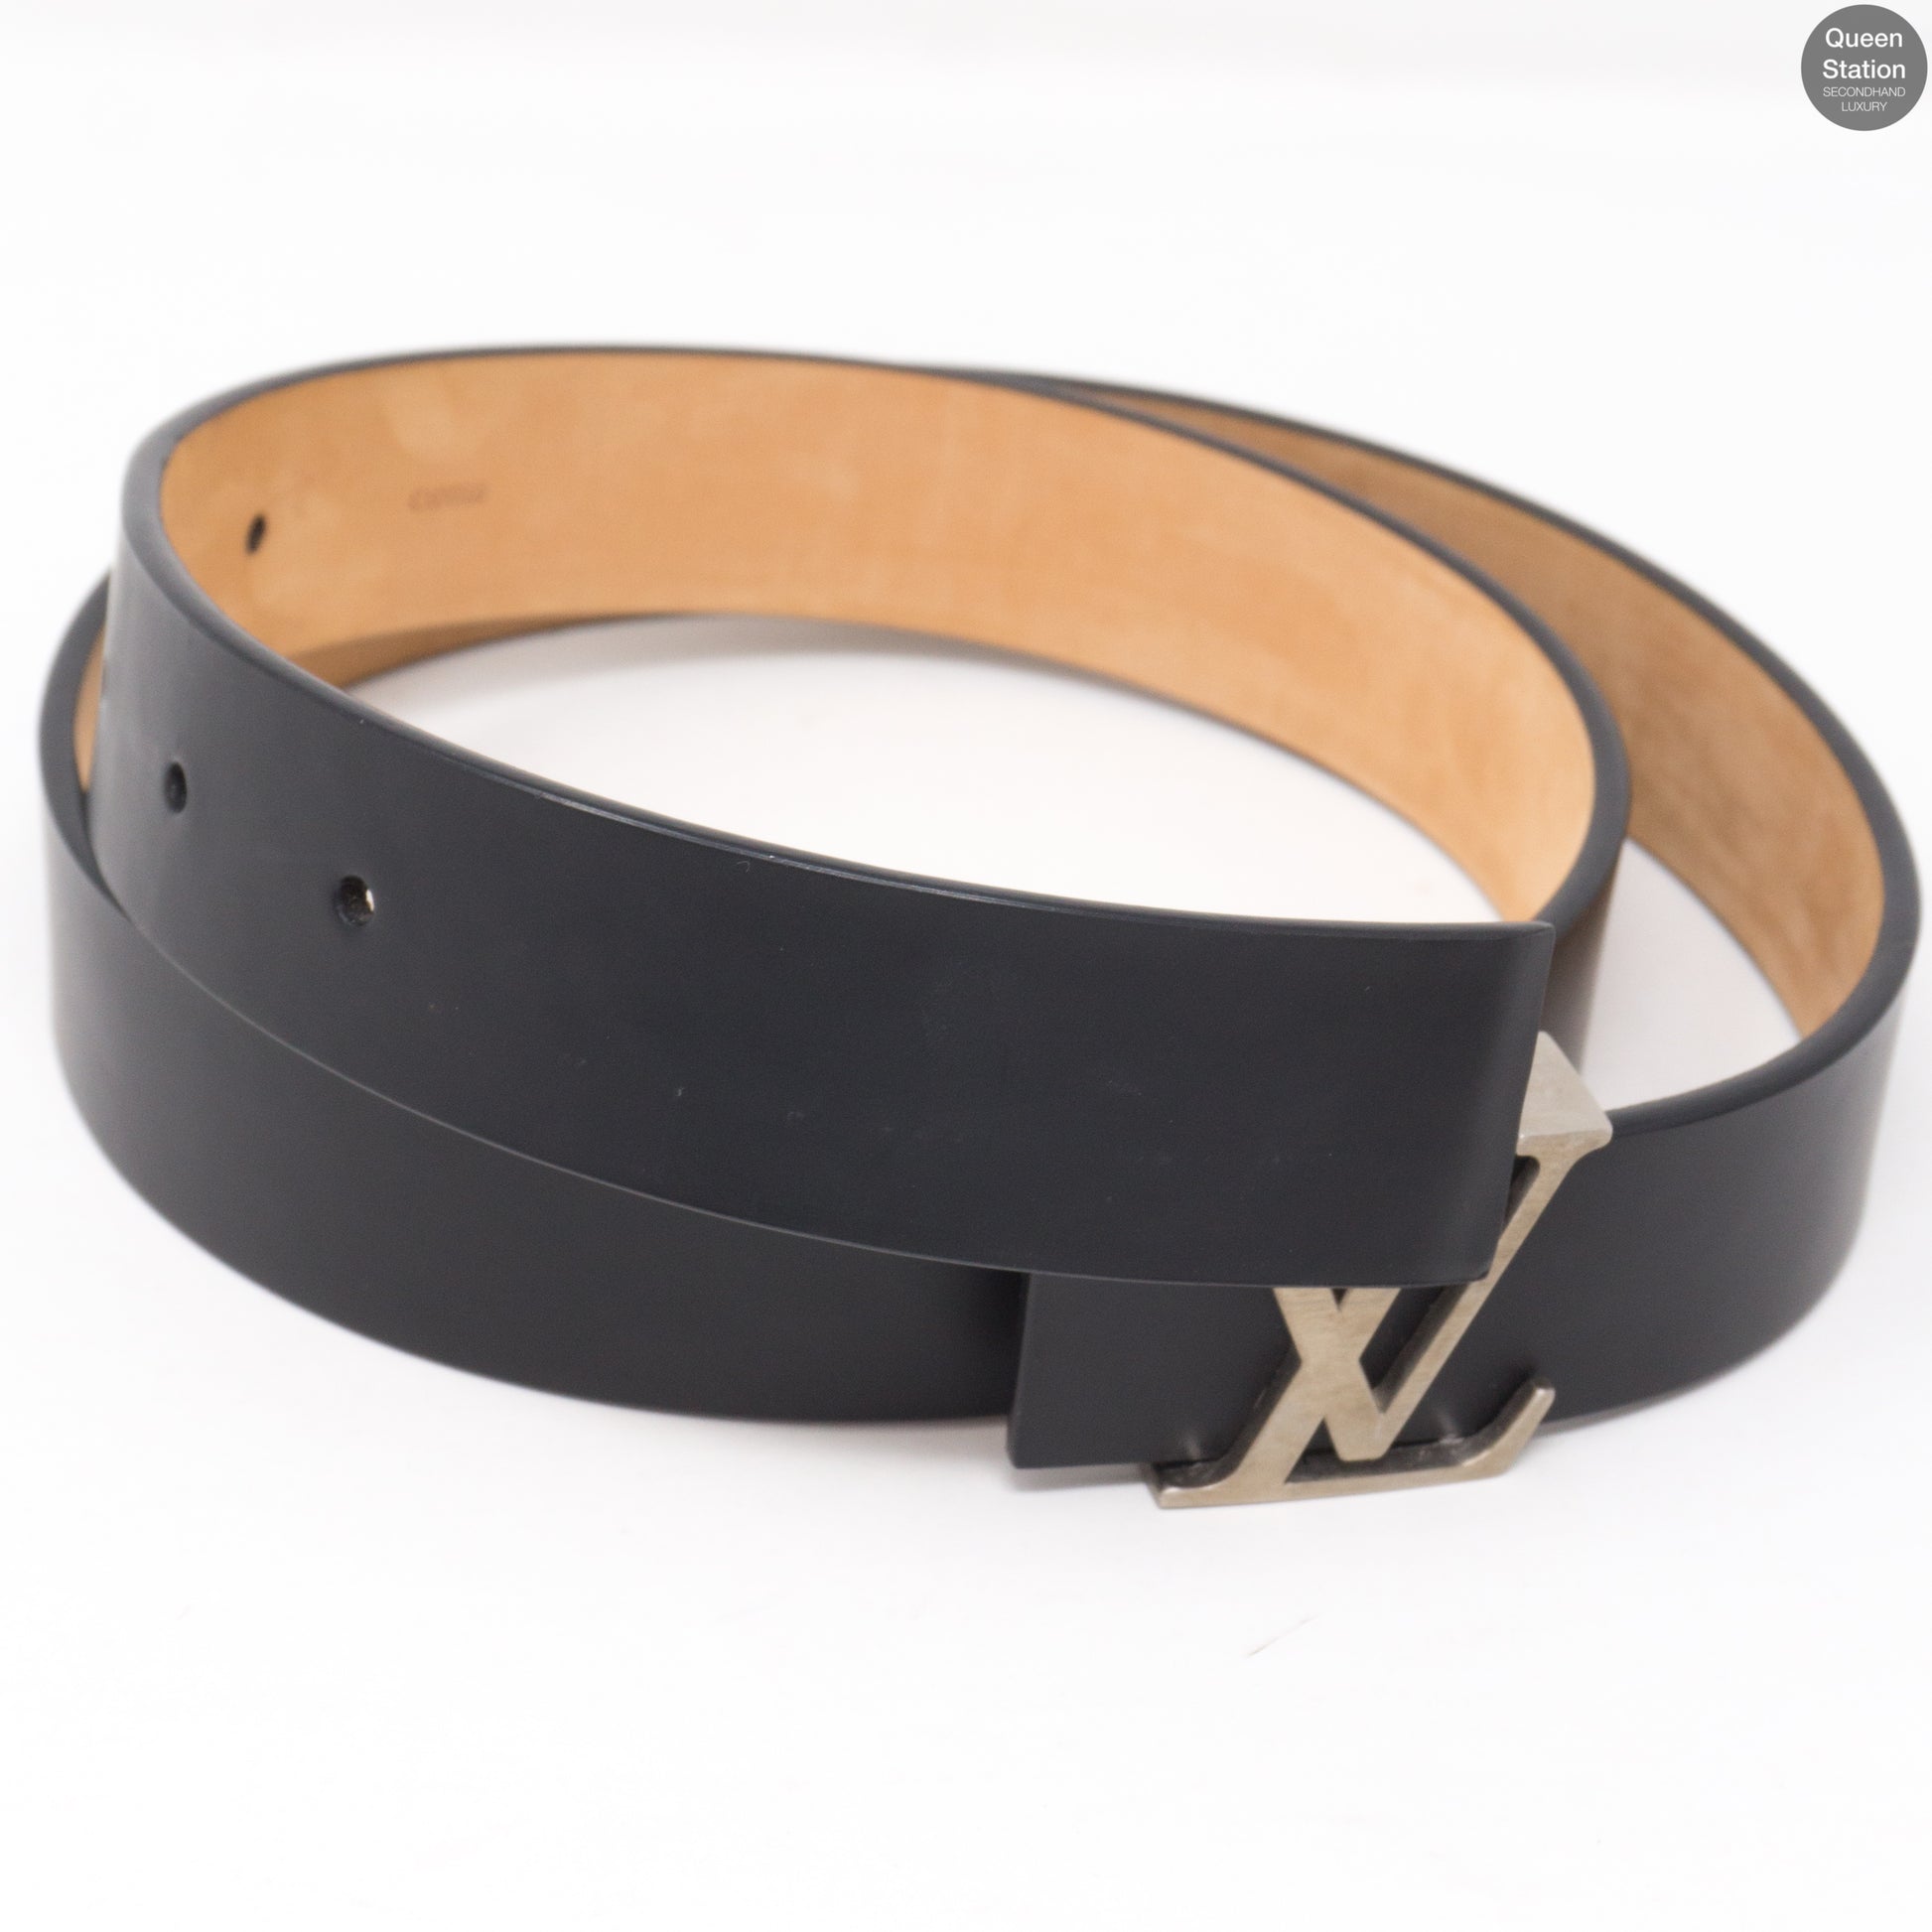 Initiales leather belt Louis Vuitton Grey size 85 cm in Leather - 31849265